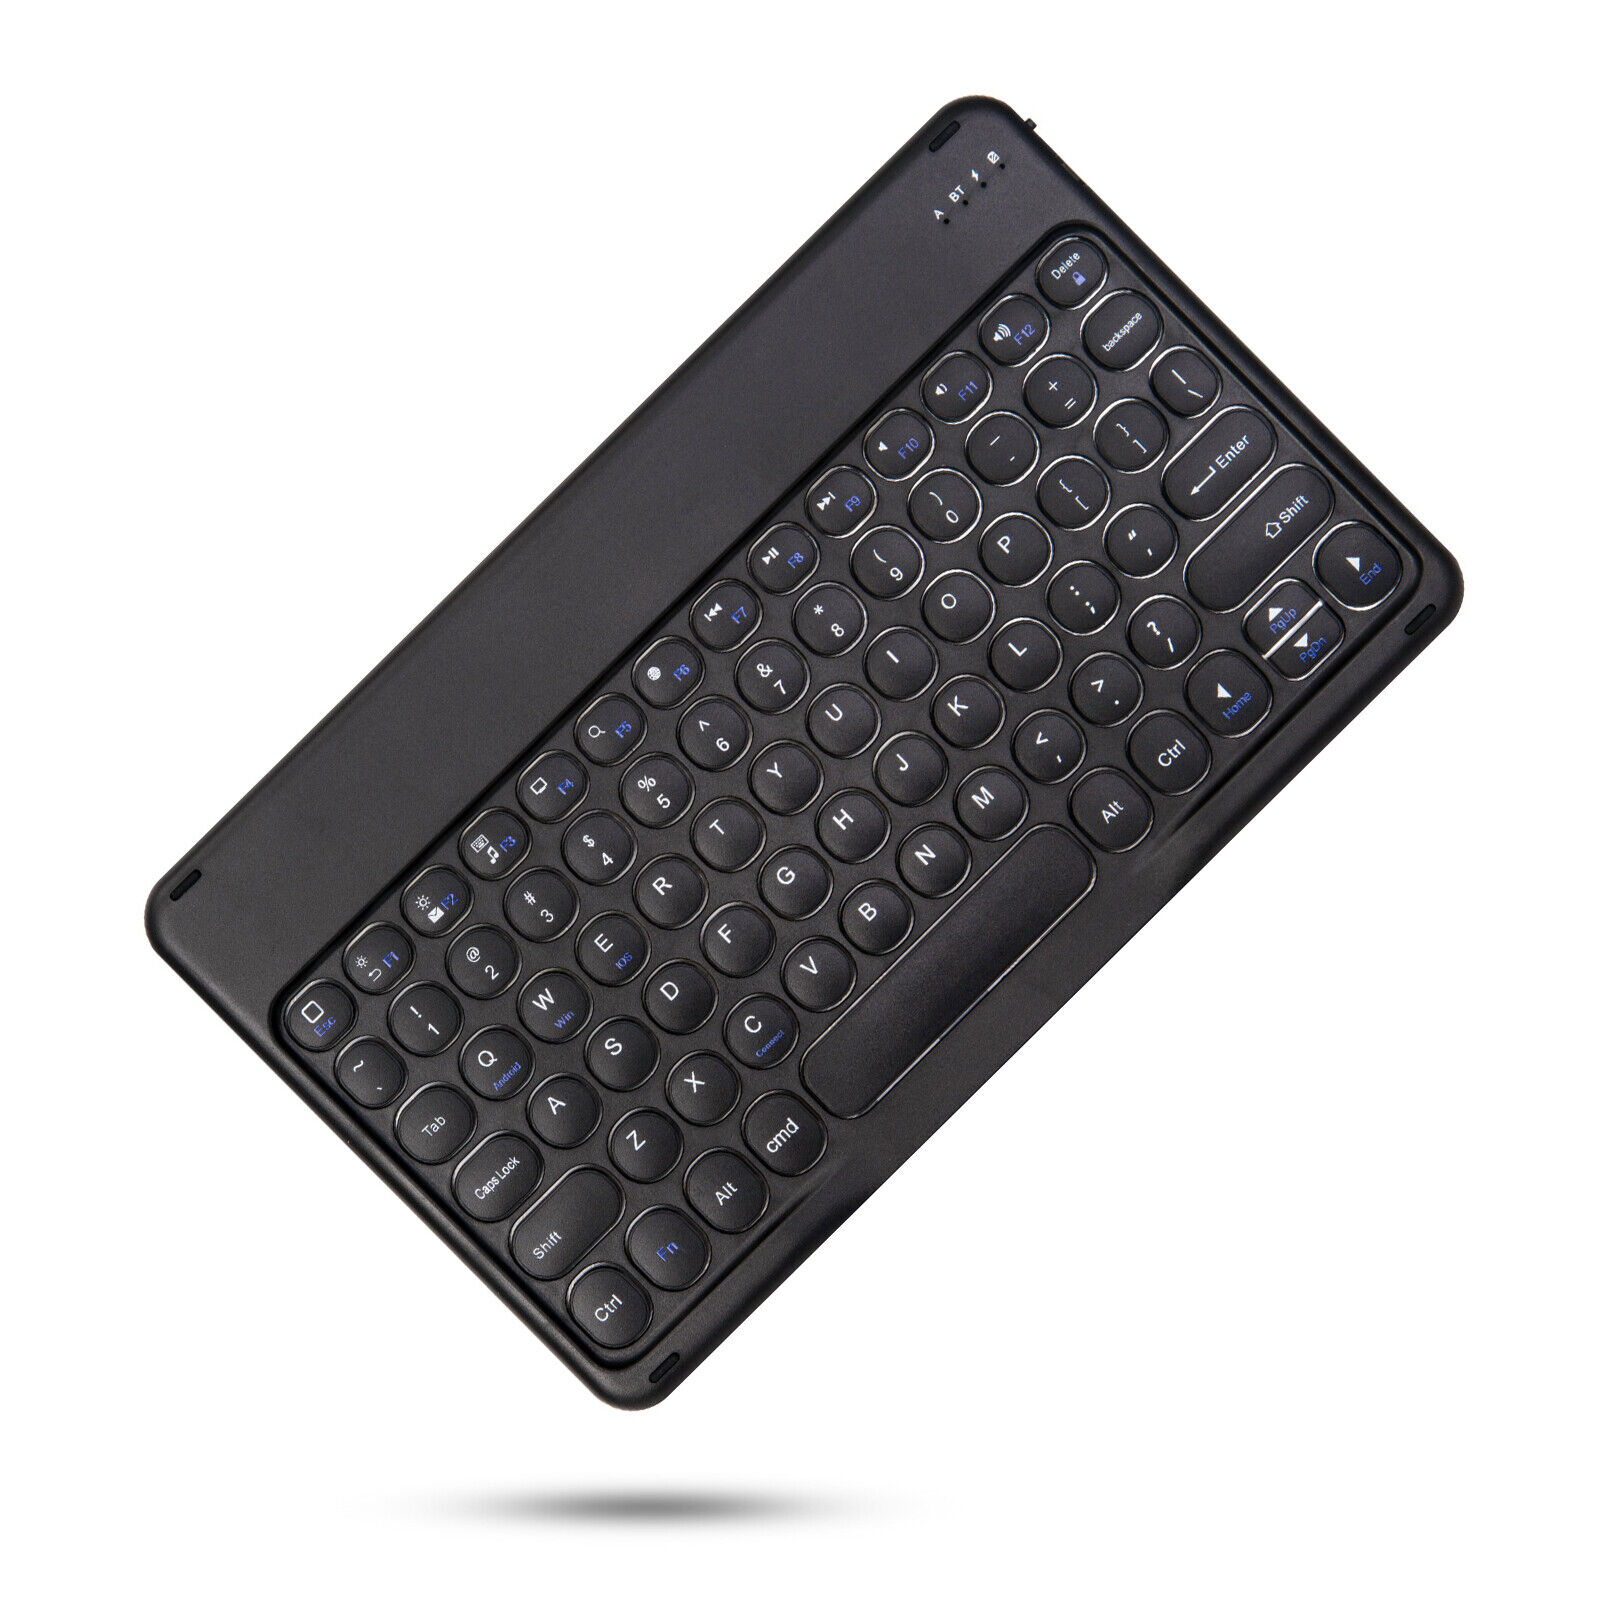 Wireless Bluetooth Round Keyboard Mouse For Android Windows iOS Tablet PC Laptop